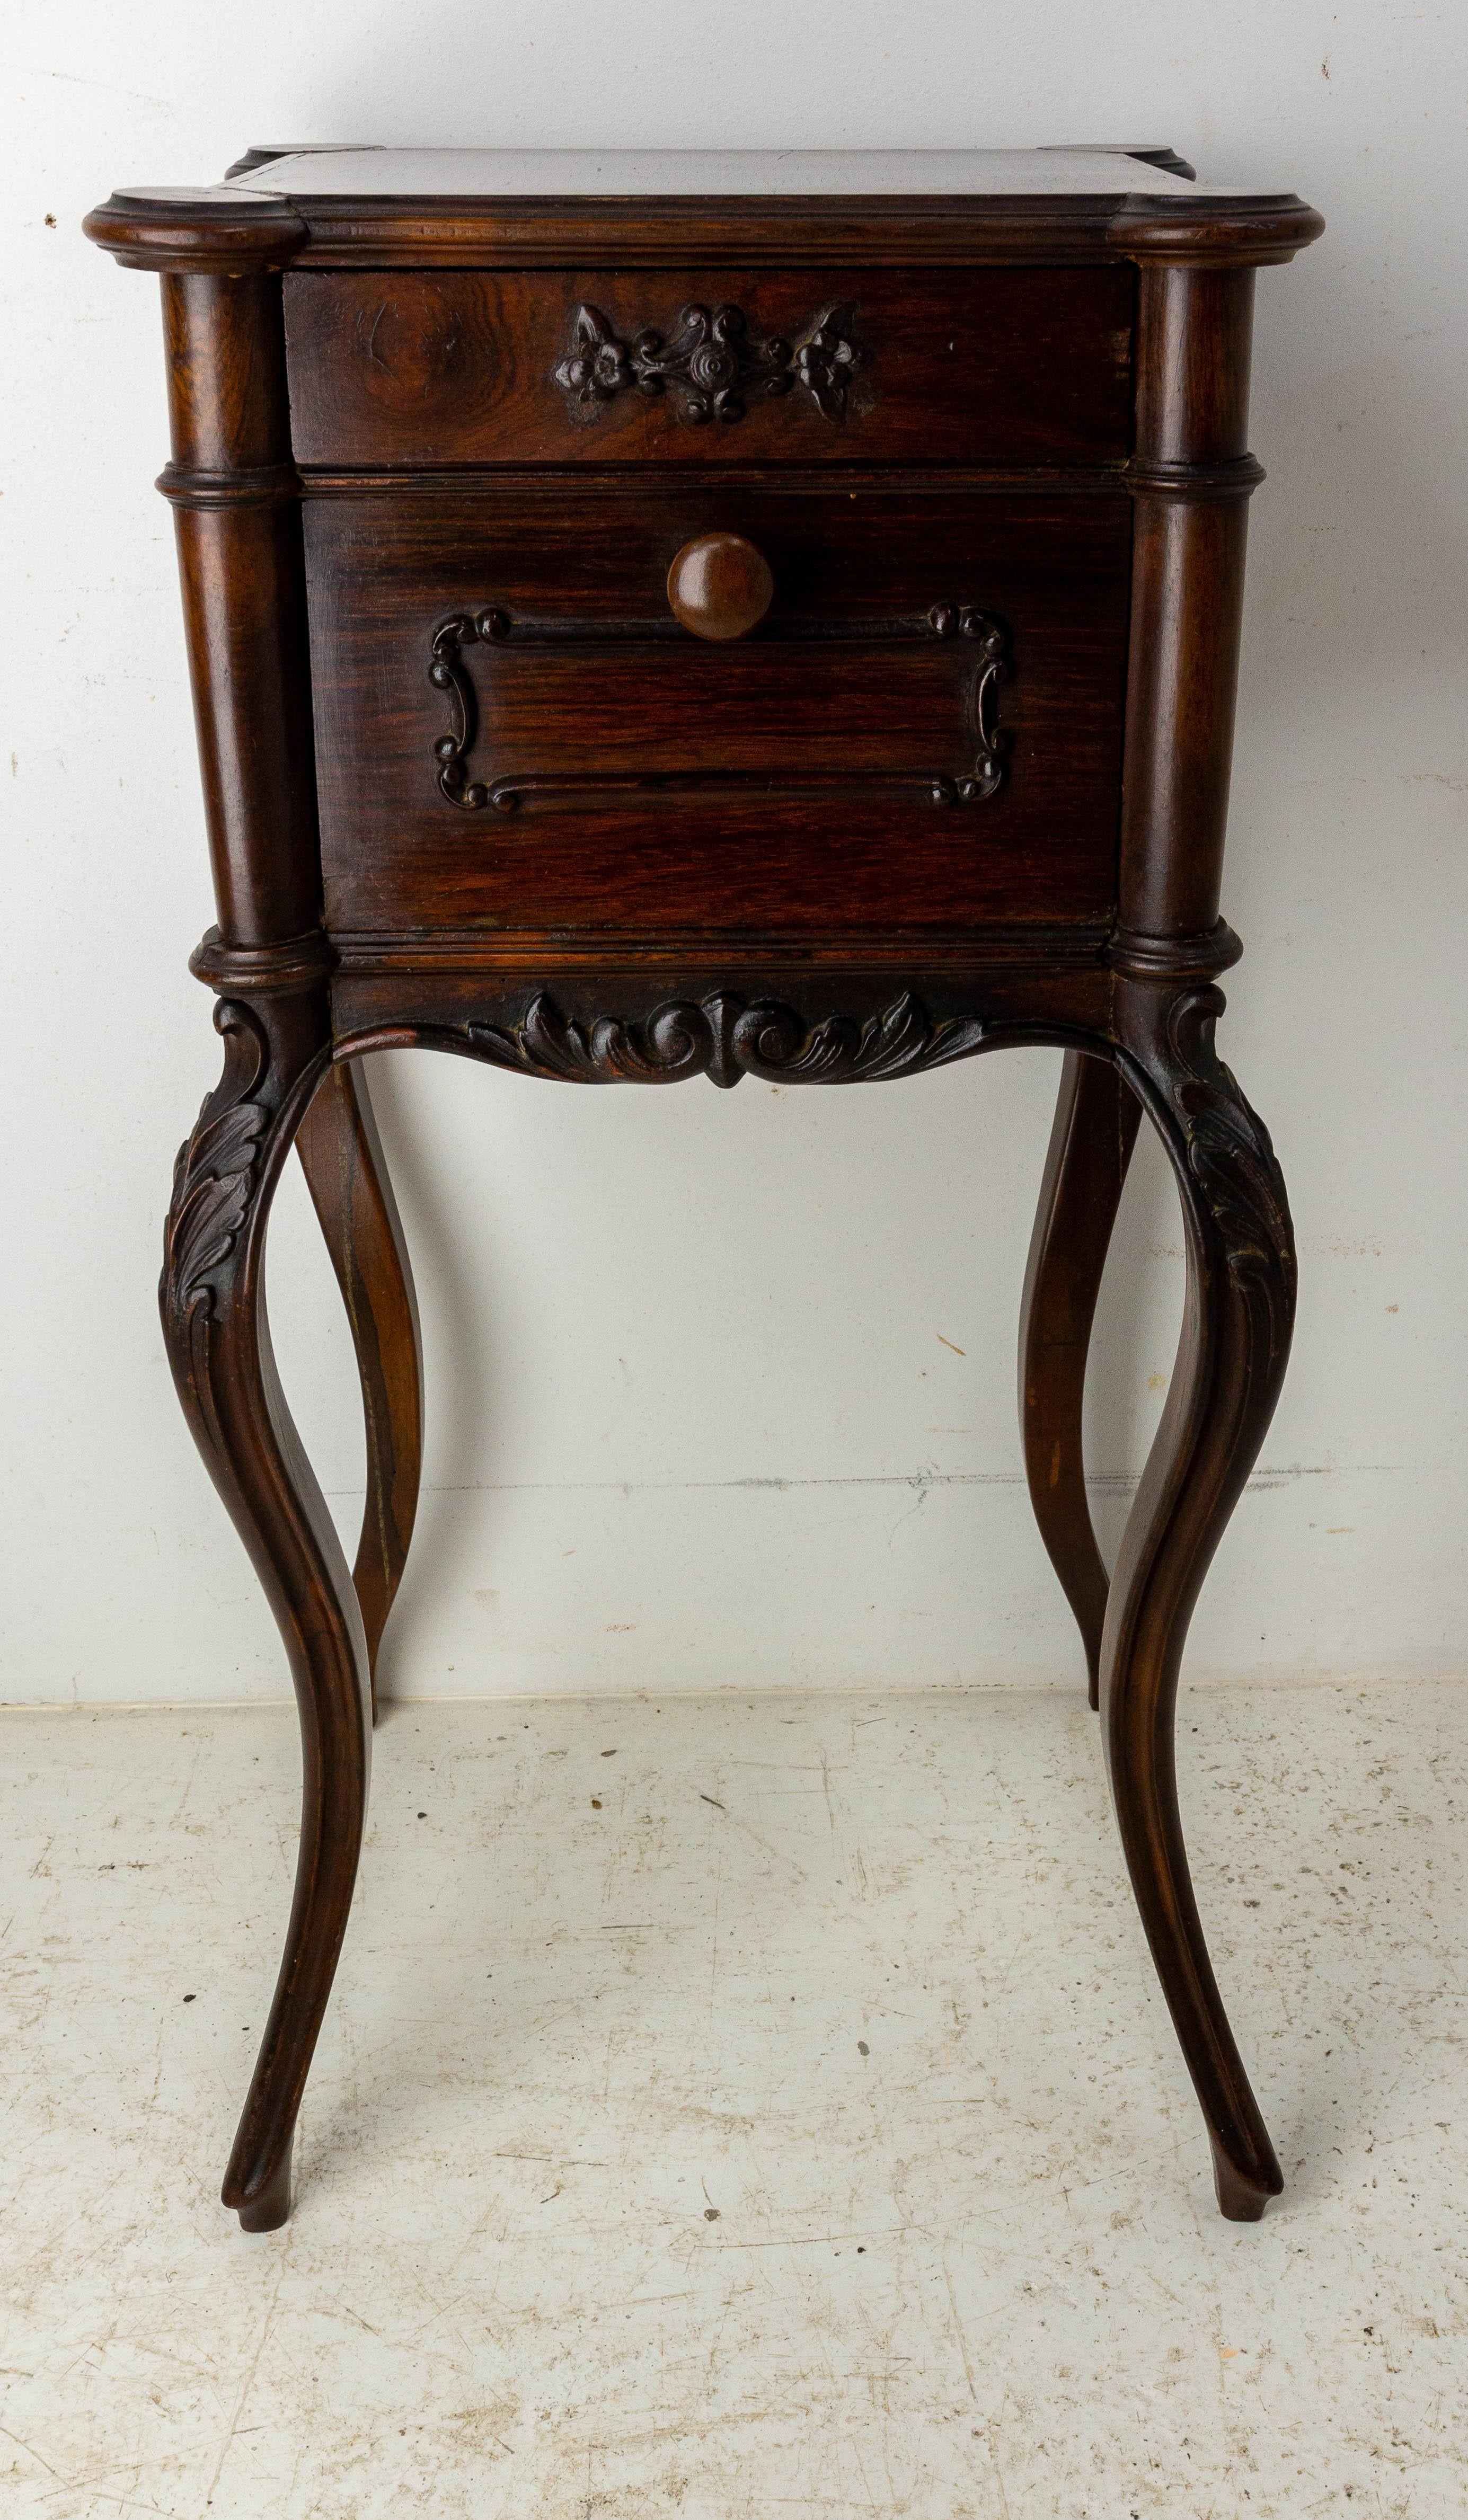 French side cabinet Louis XV style nightstand
Late 19th century
Walnut bedside table
One drawer and one trapdoor
Hand-carved with vegetal and floral motifs.
Good condition.

Shipping:
P39.5 L43 H88 7,5 KG